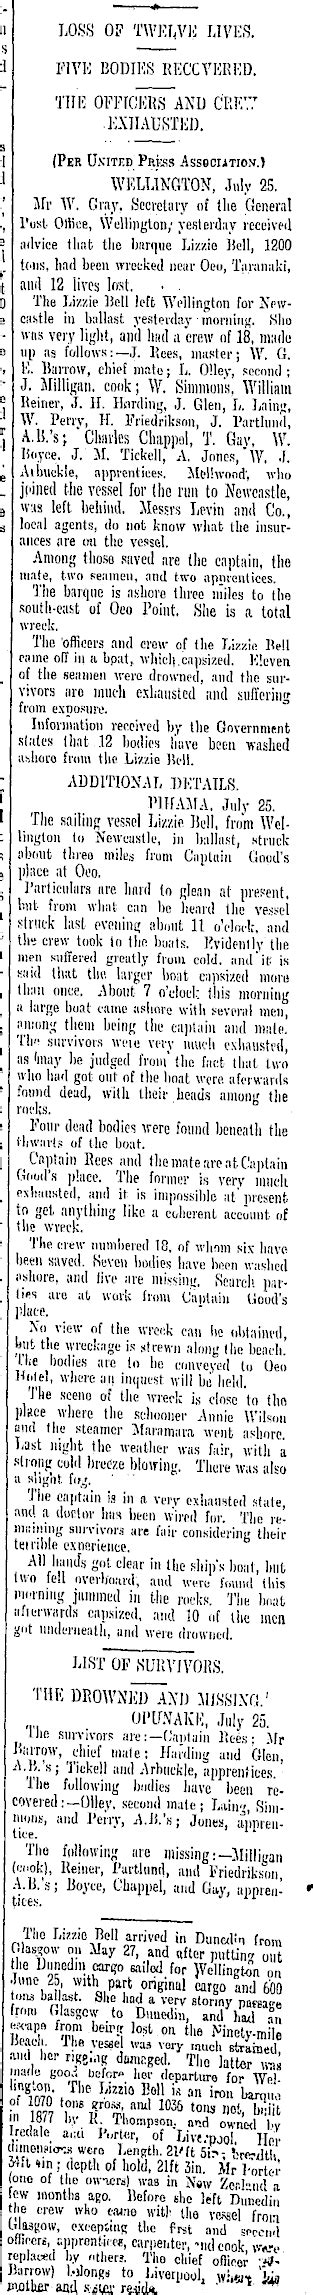 Papers Past Newspapers Otago Daily Times 26 July 1901 Wreck Of